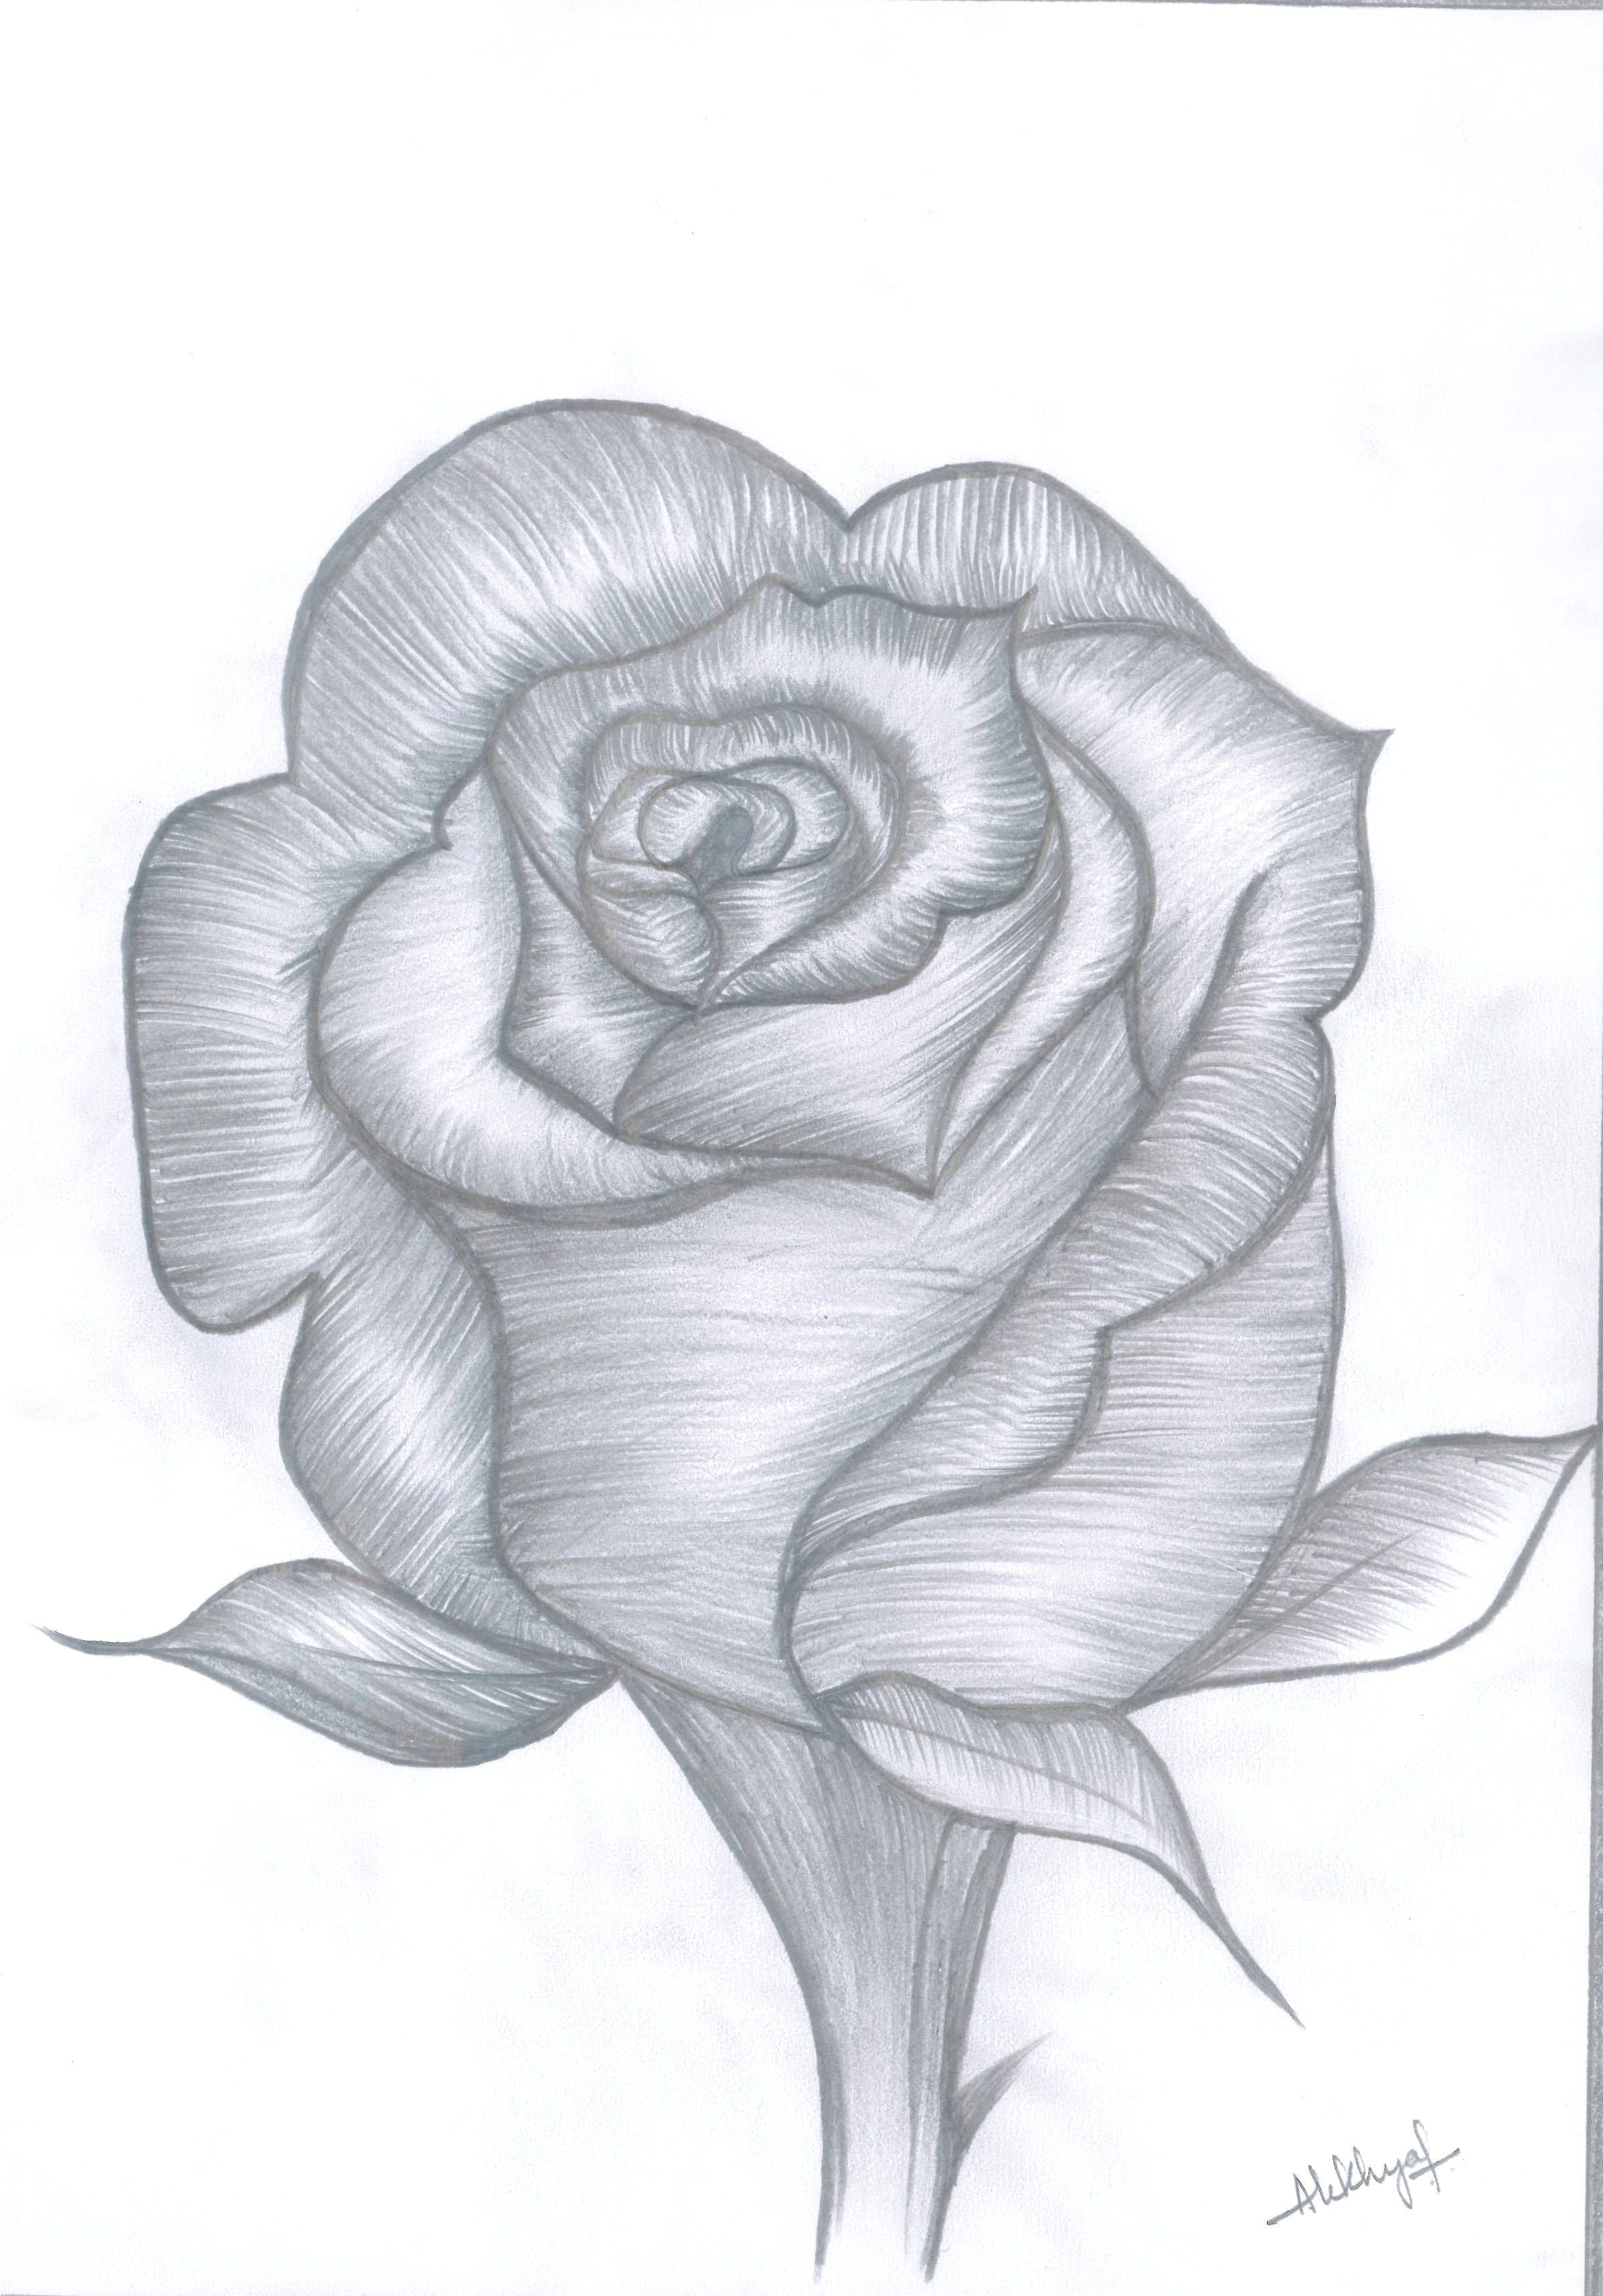 Drawings Of Roses with Color Rose Bud Drawings In 2018 Pinterest Draw Rose Buds and Pencil